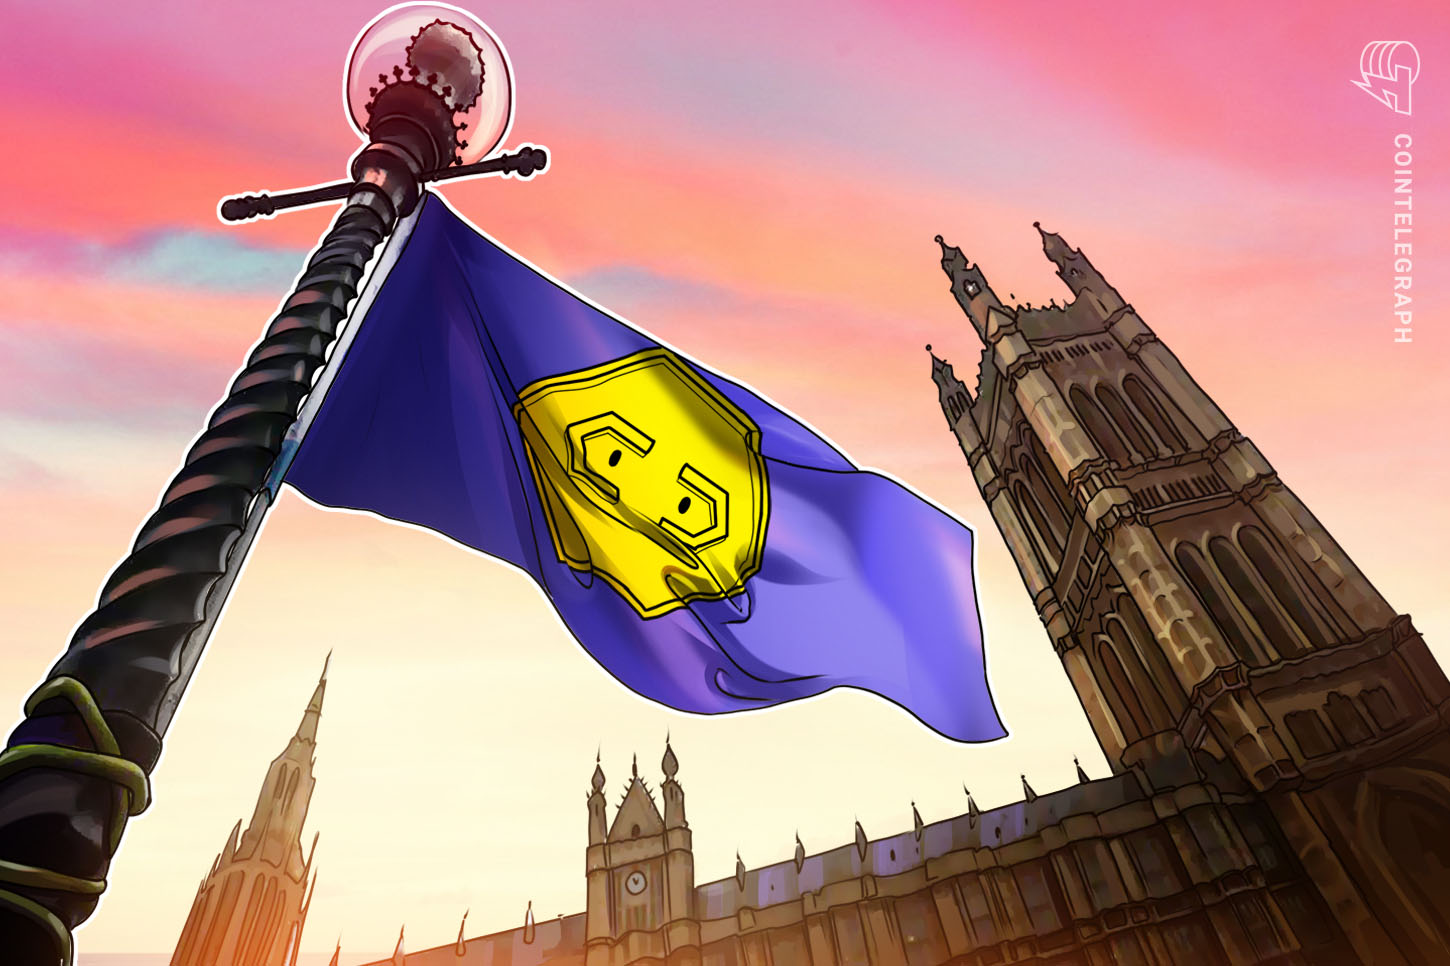 London emerges as world’s most crypto-ready city for business — research